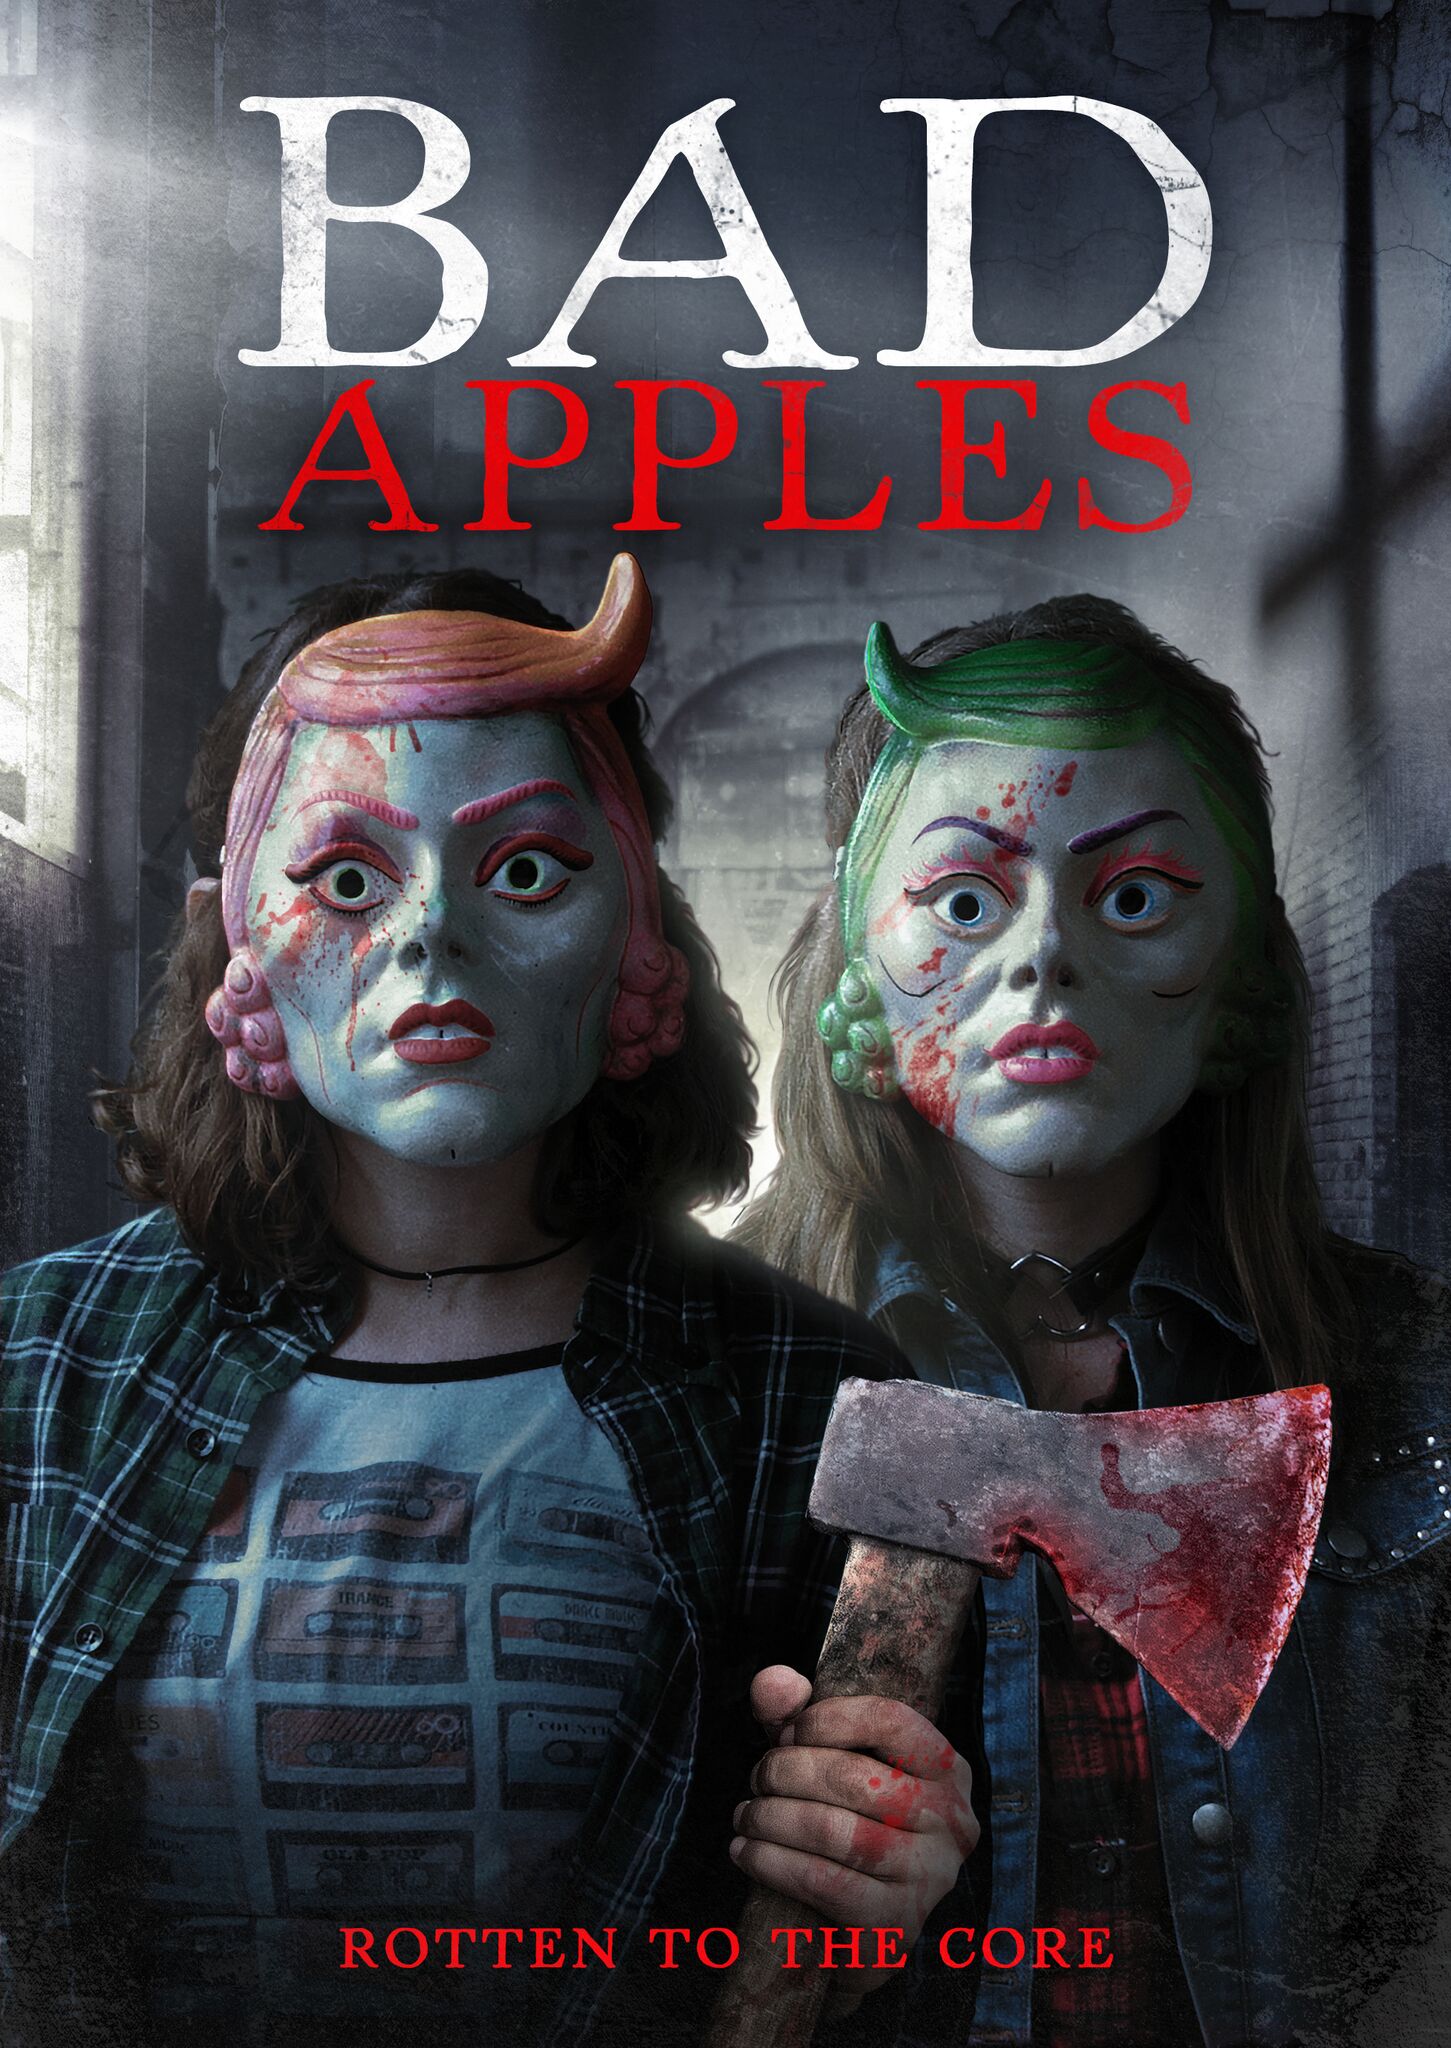 Bad Apples film review: Twins of evil go on a murder spree in this Halloween slasher